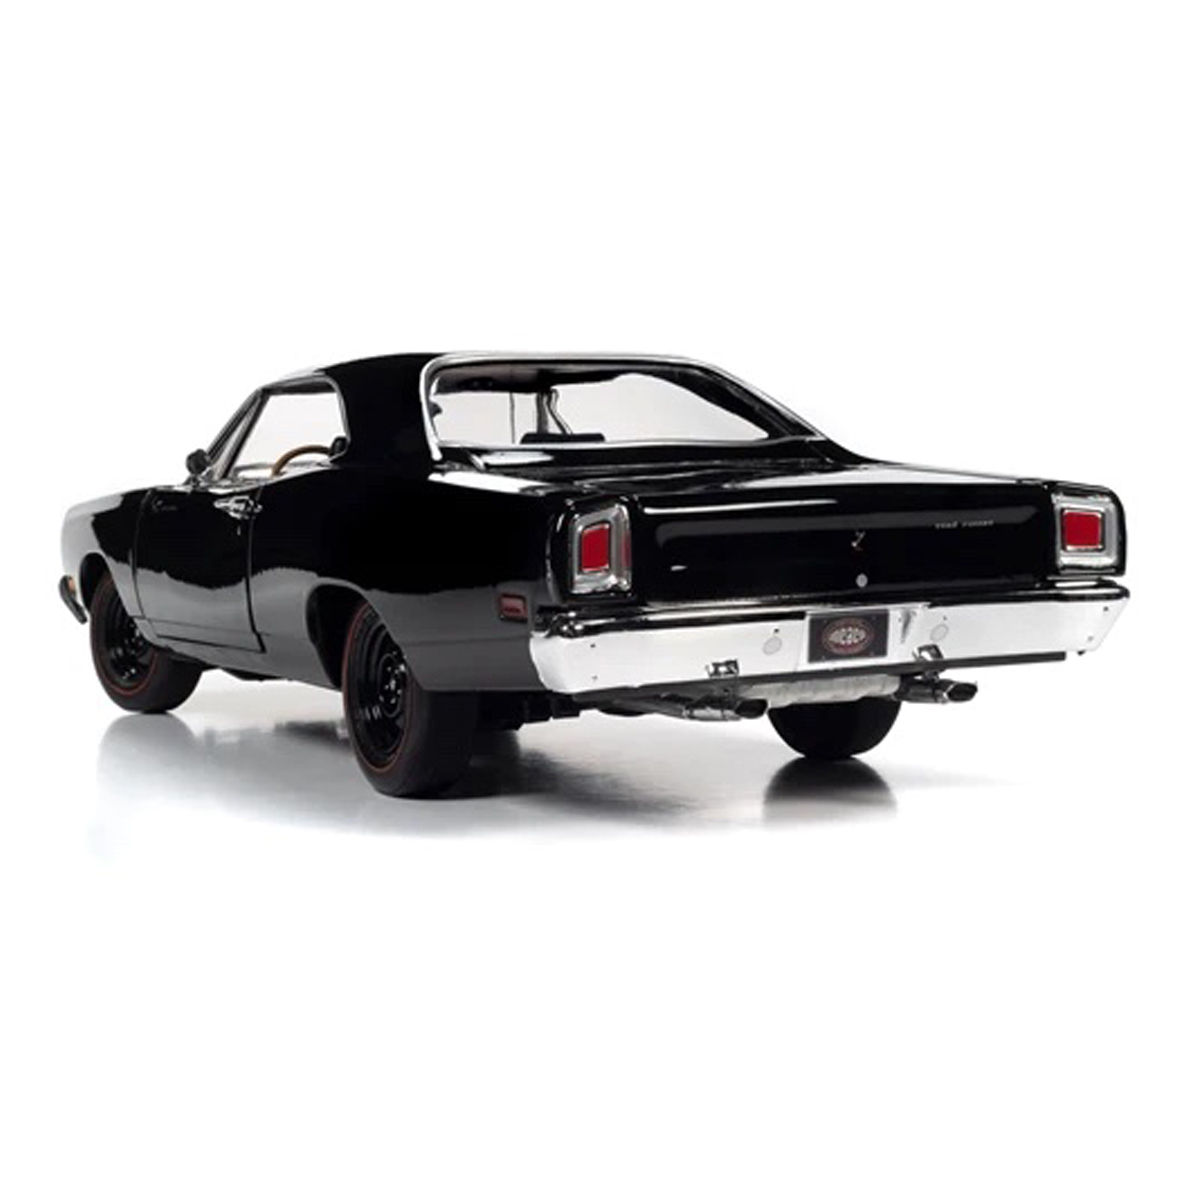 American Muscle,1:18 Scale 1969 1/2 Plymouth Road Runner MCACN Auto World American Muscle